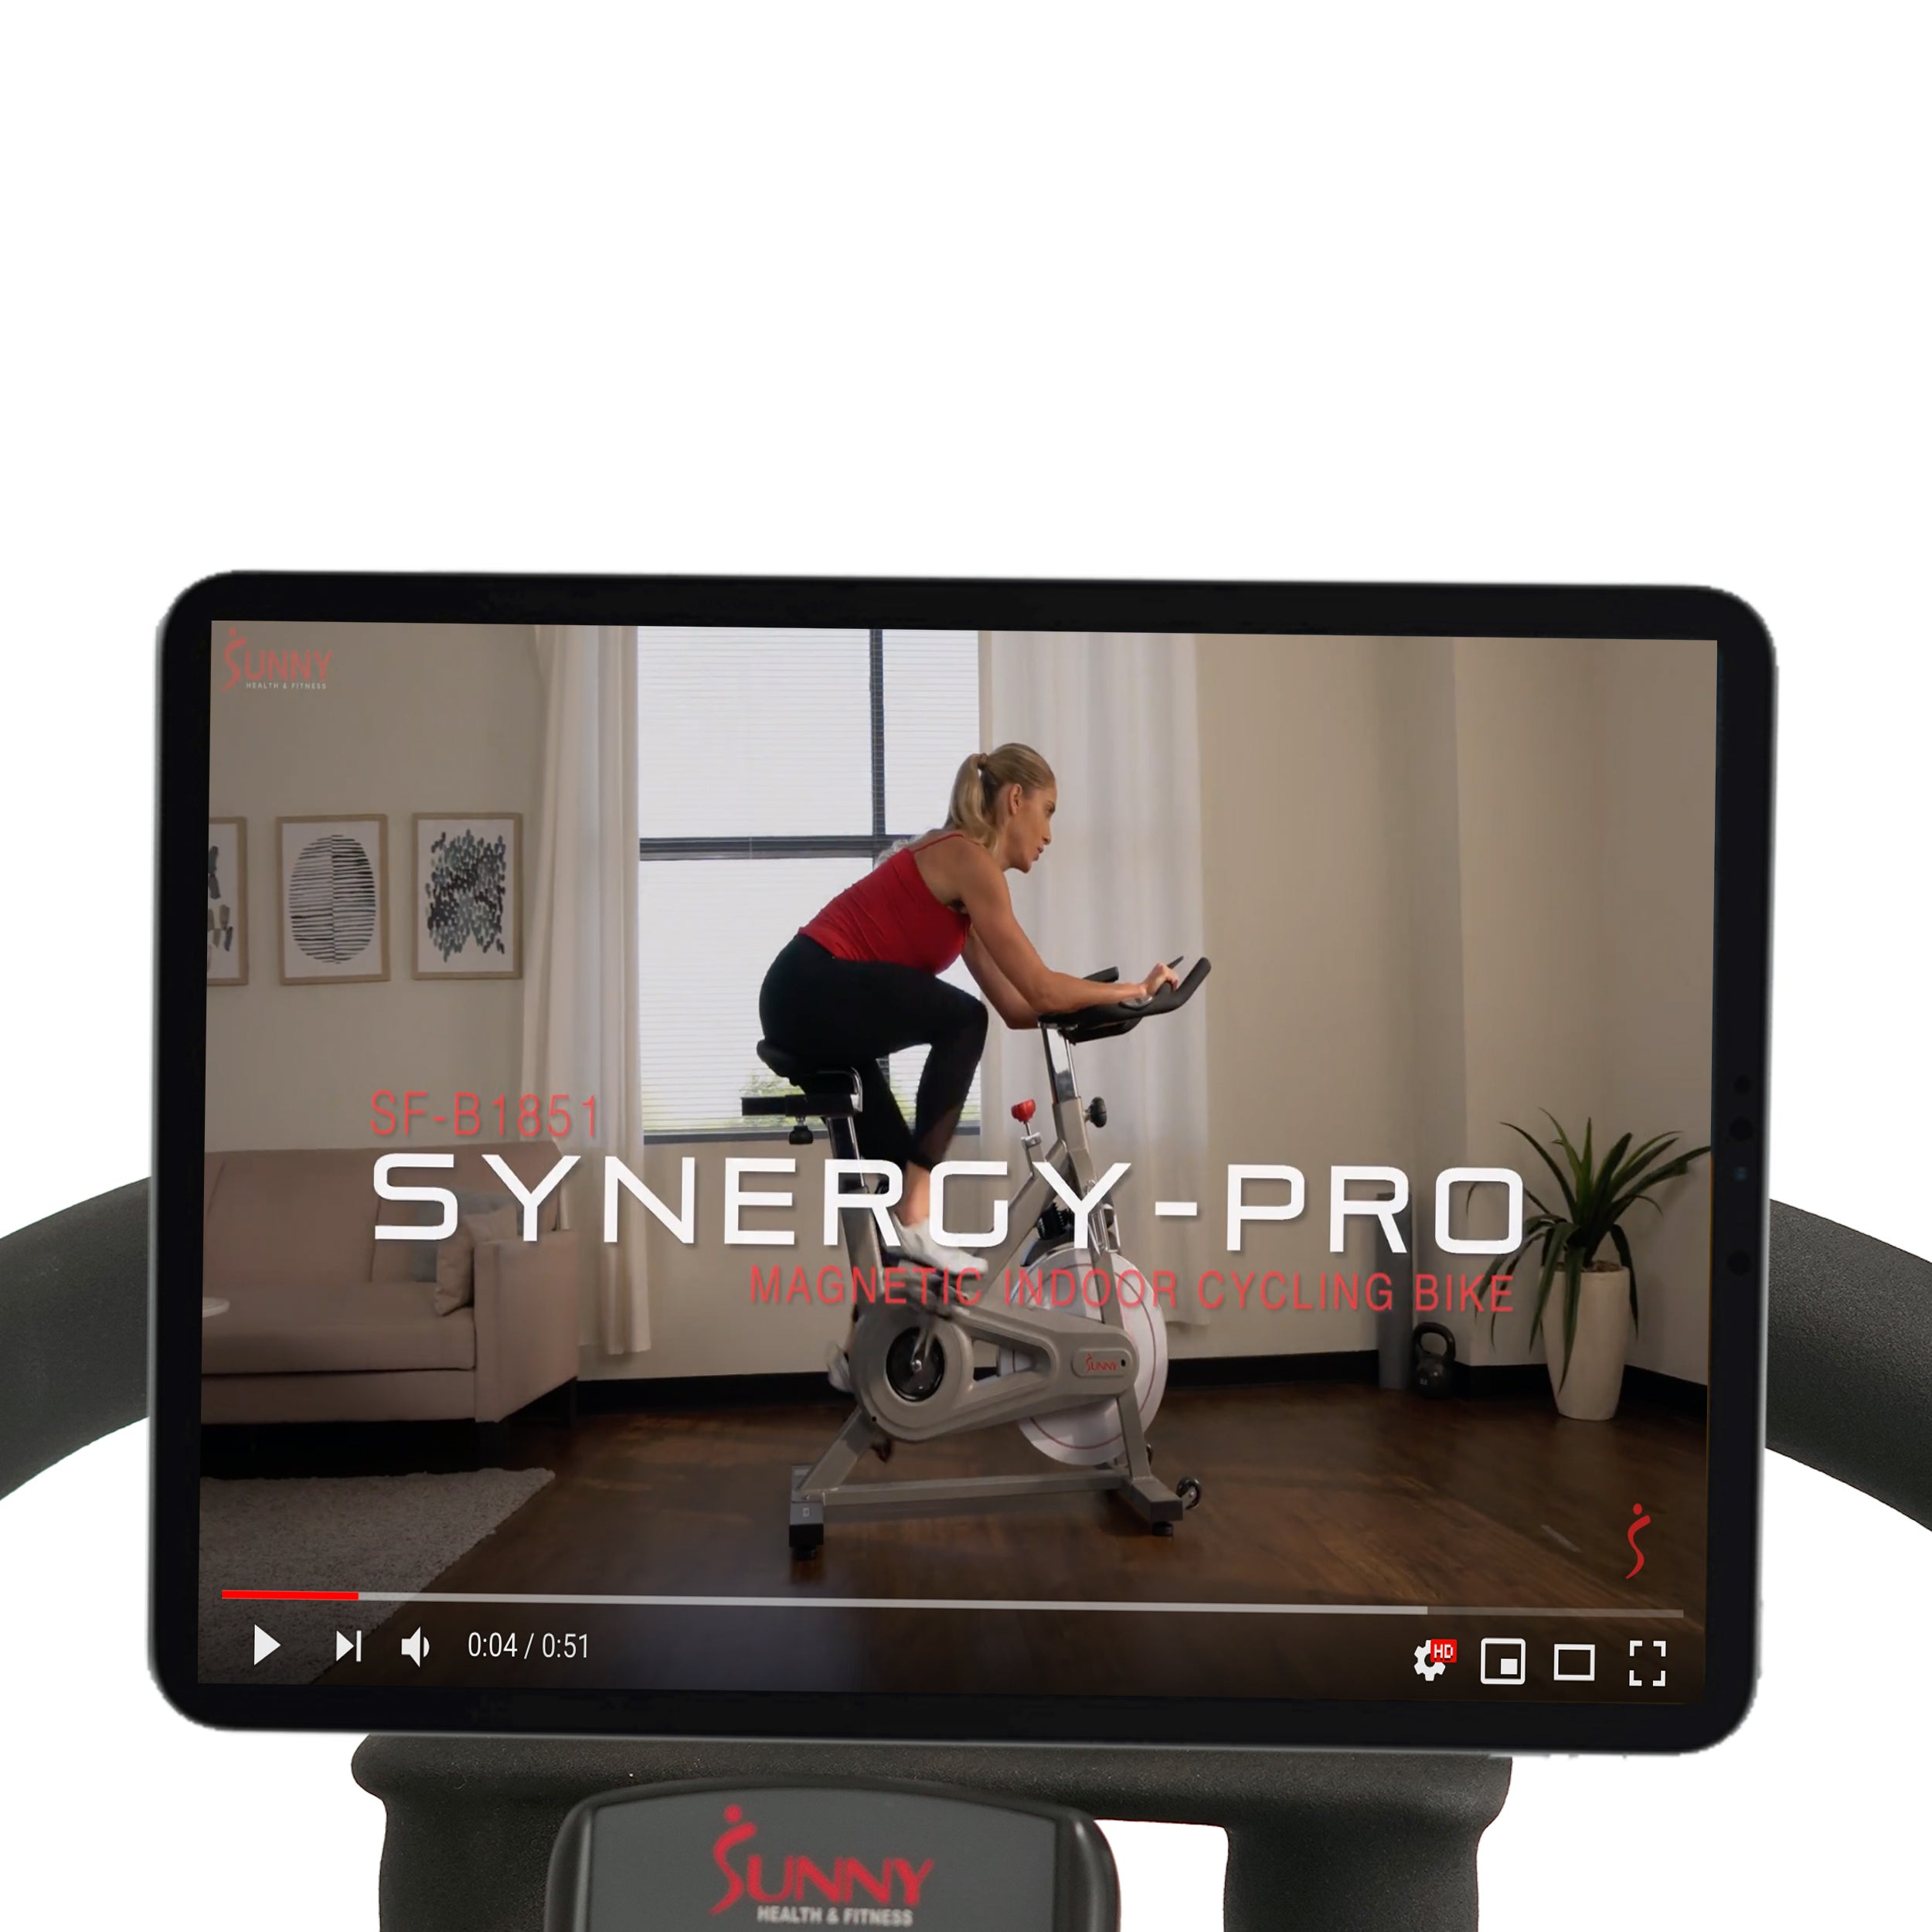 synergy pro magnetic indoor cycling bike